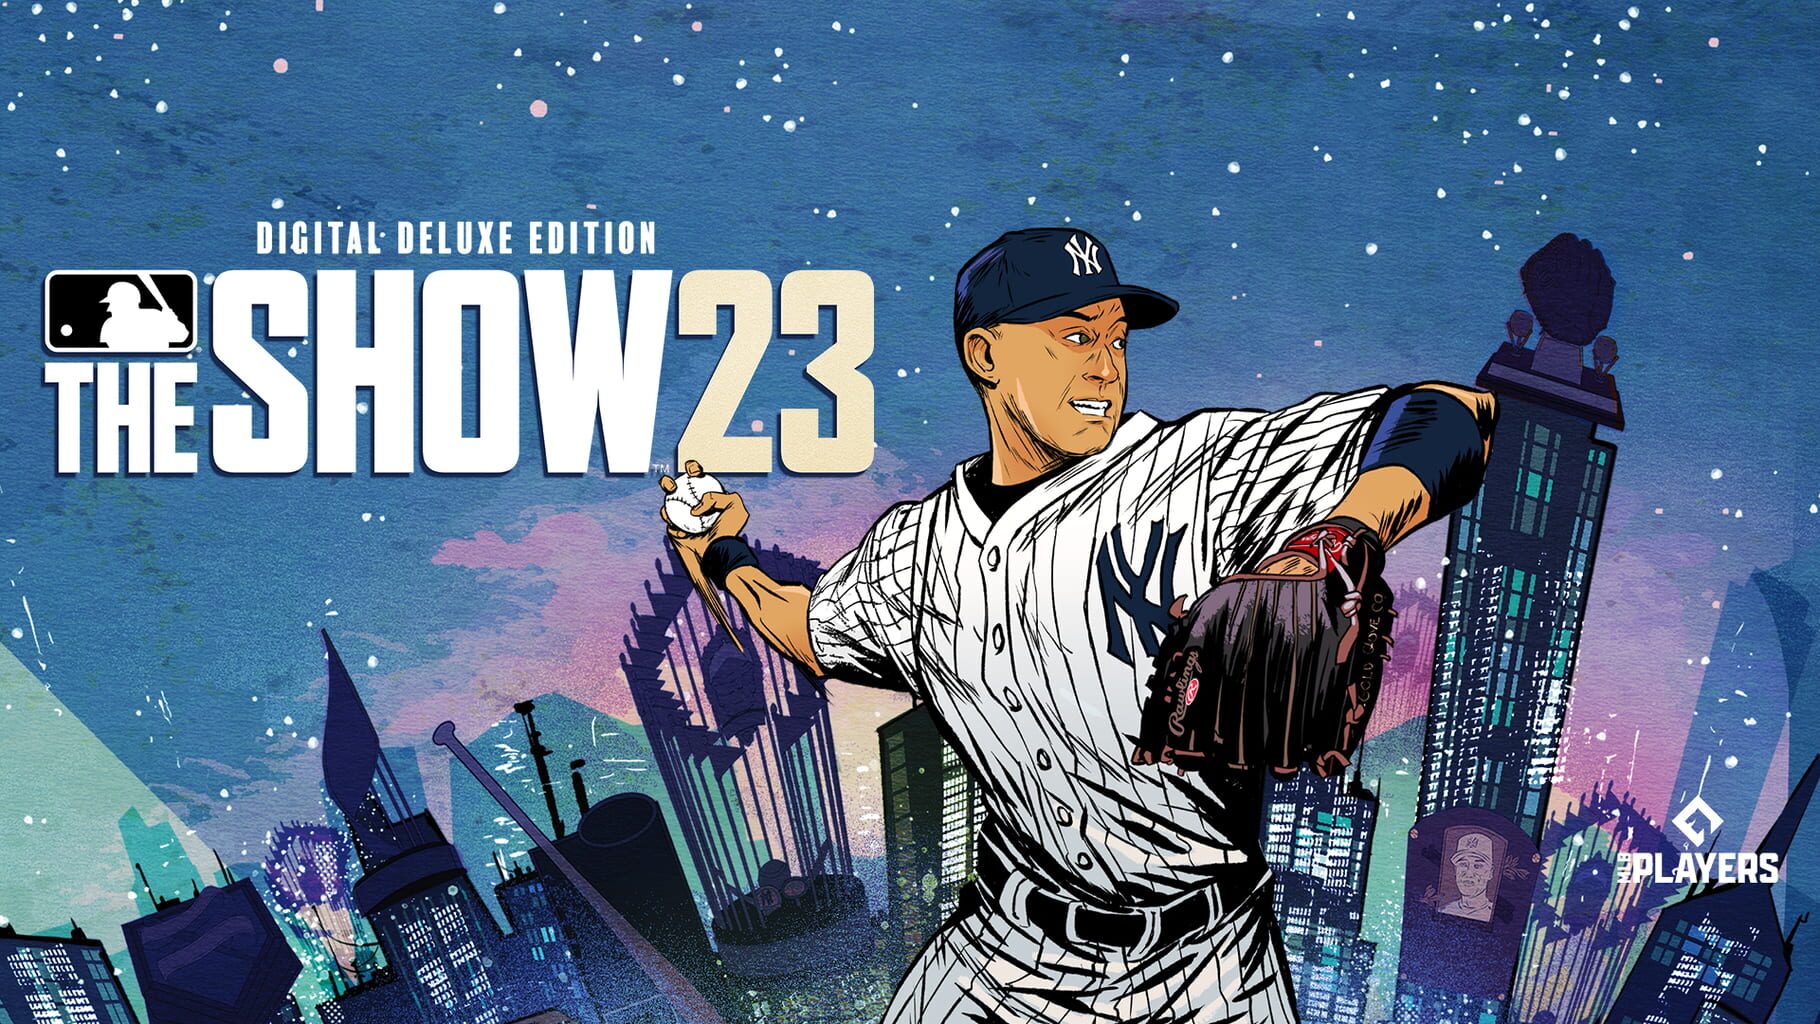 MLB The Show 23: Digital Deluxe Edition artwork